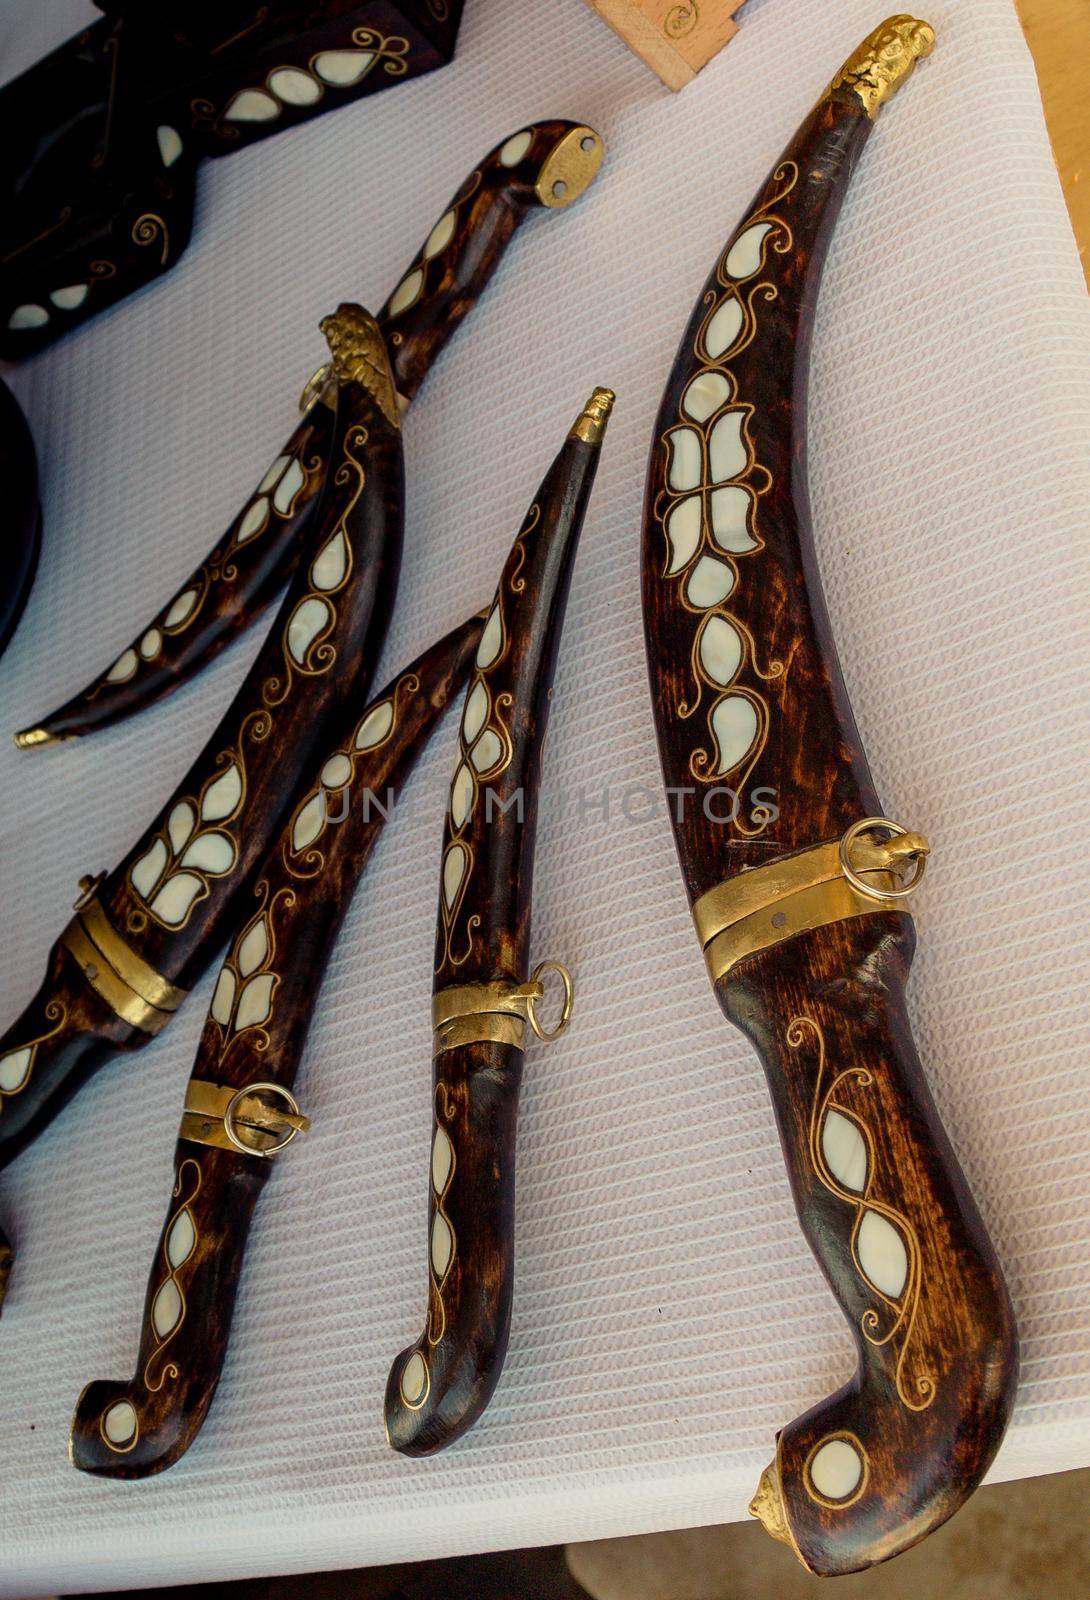 Turkish style daggers with mother of pearl inlays by berkay